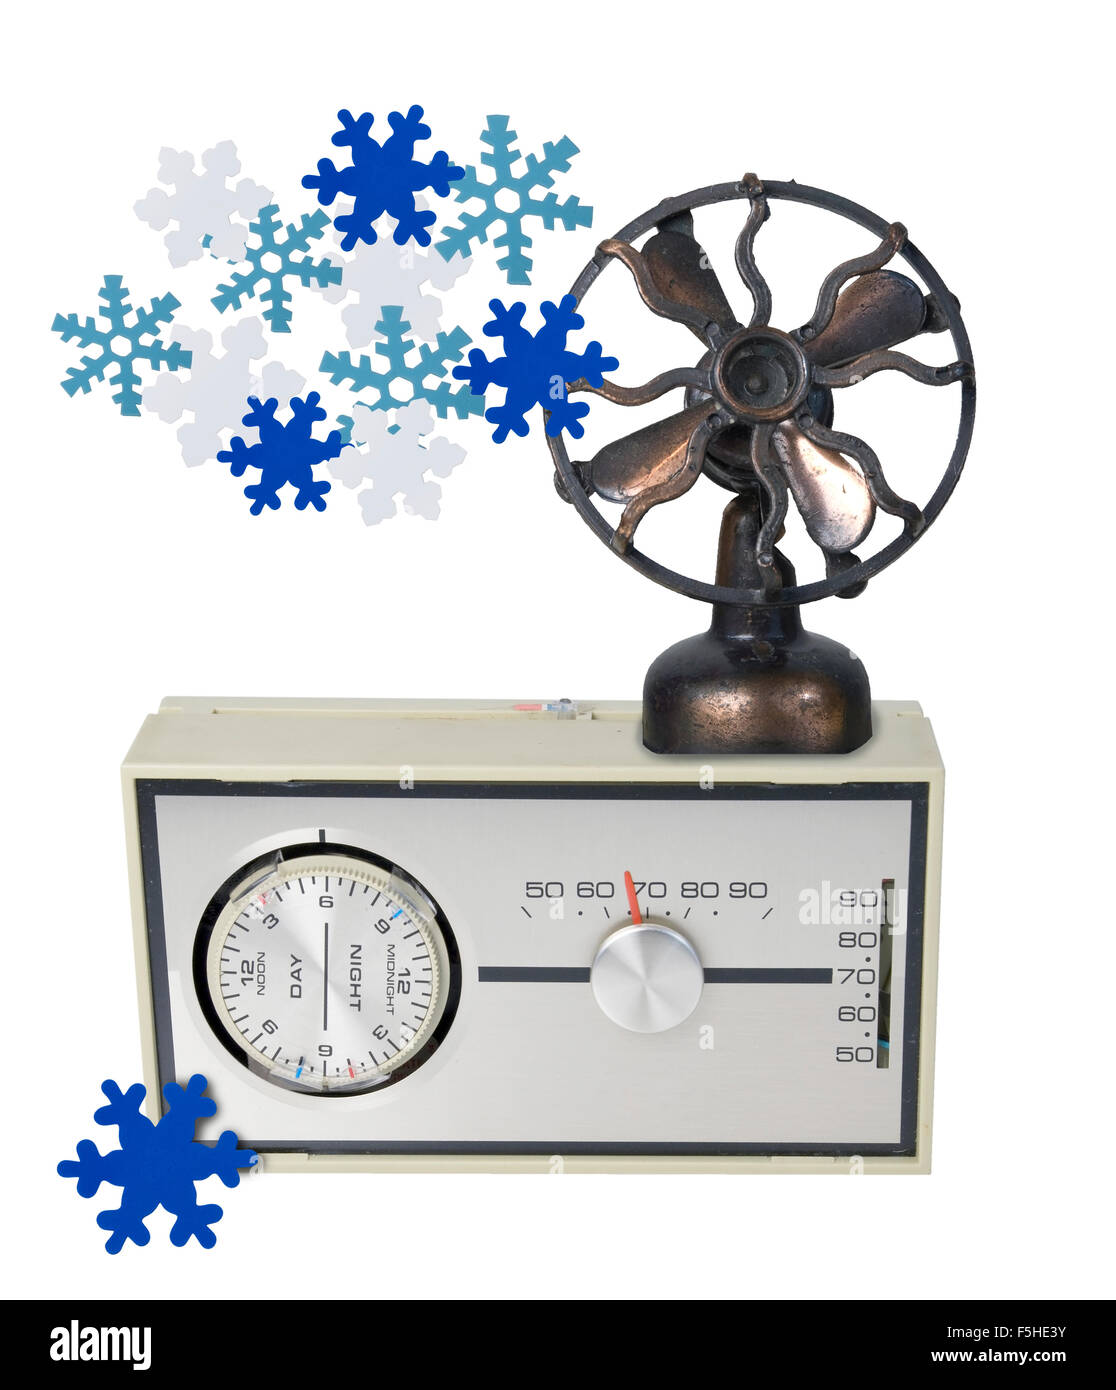 Thermostat Furnace dial with Fan and Snowflakes - path included Stock Photo